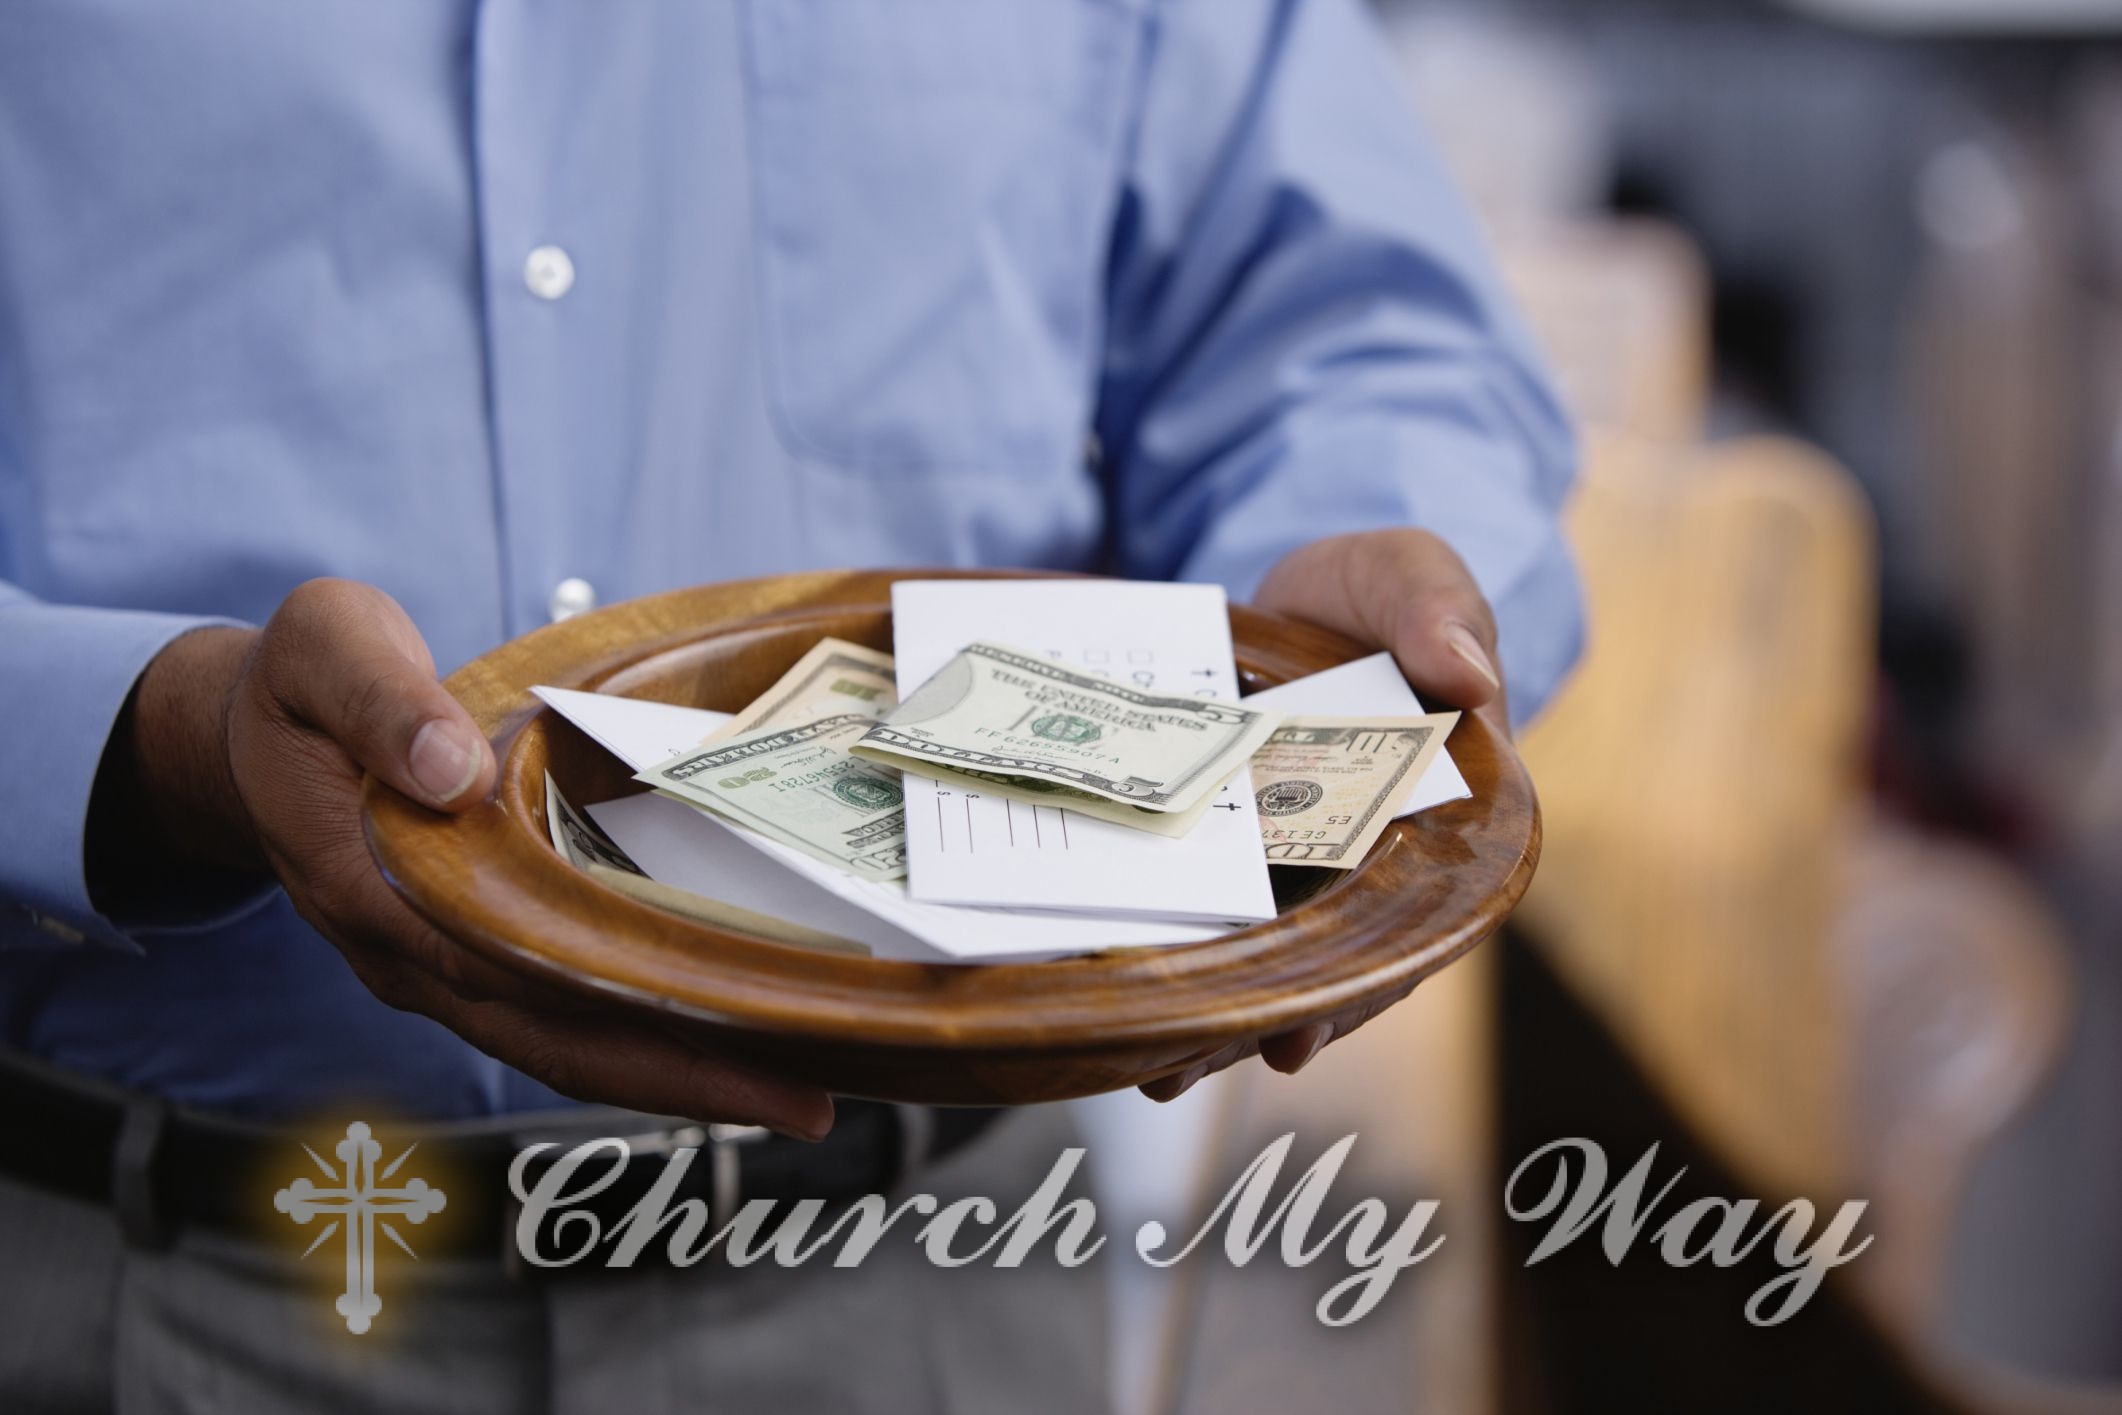 How can the church help you with finances